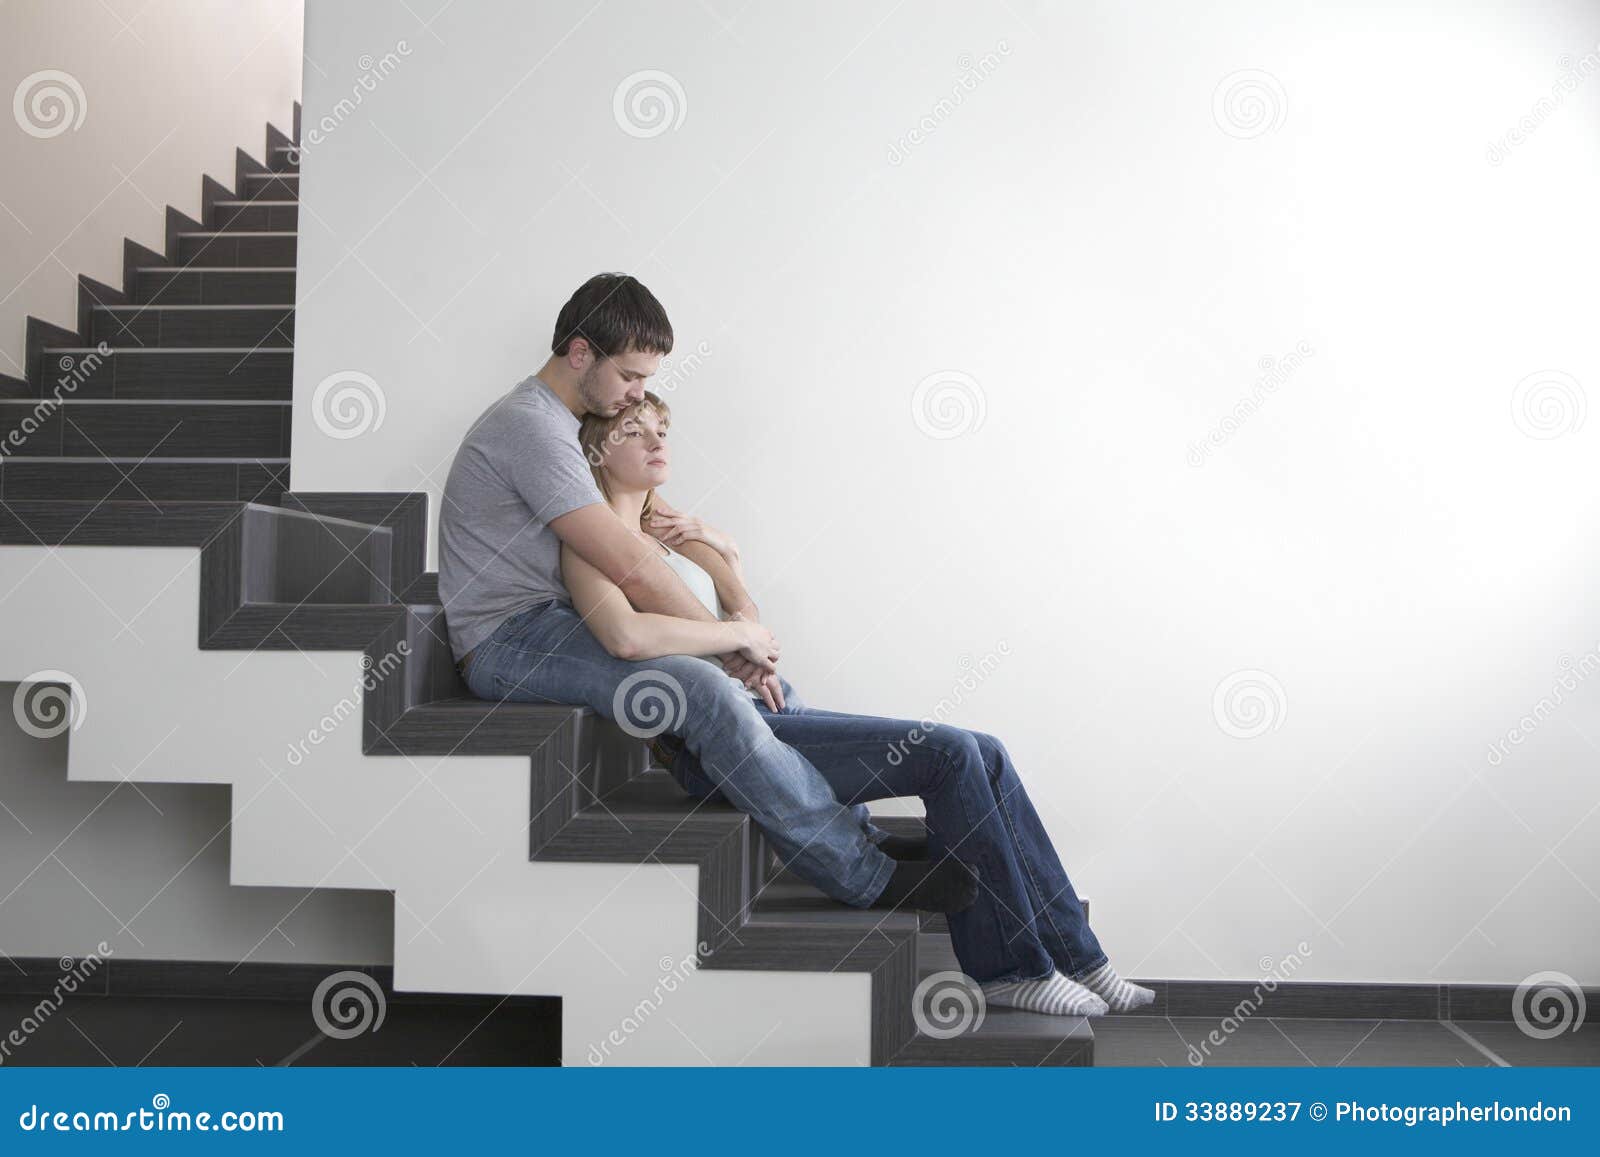 Image result for lovers couple in the stairs